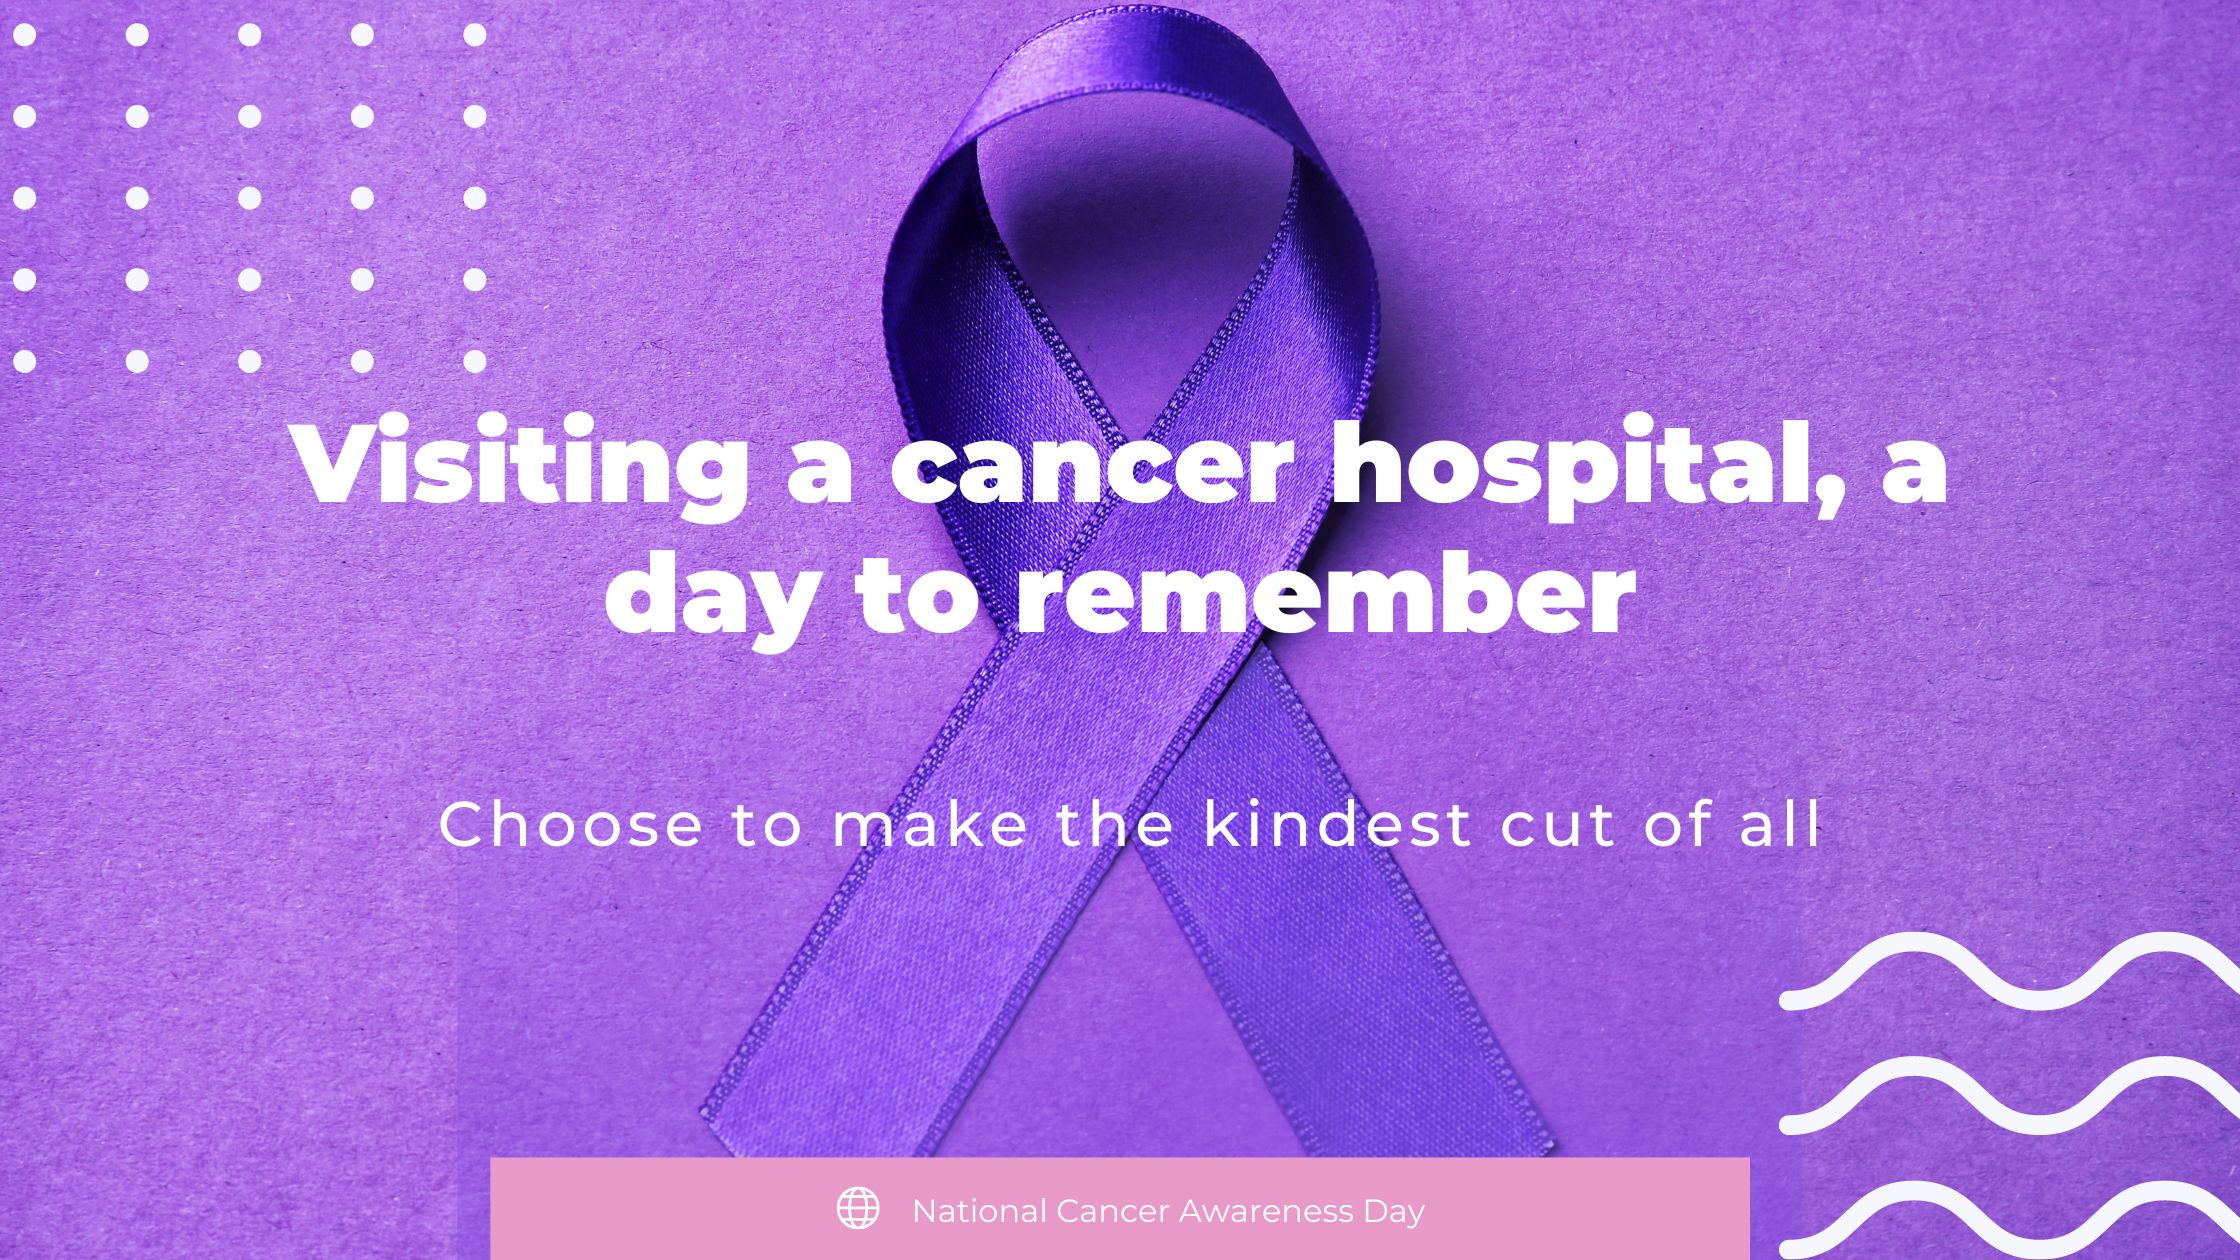 Visiting a cancer hospital, a day to remember